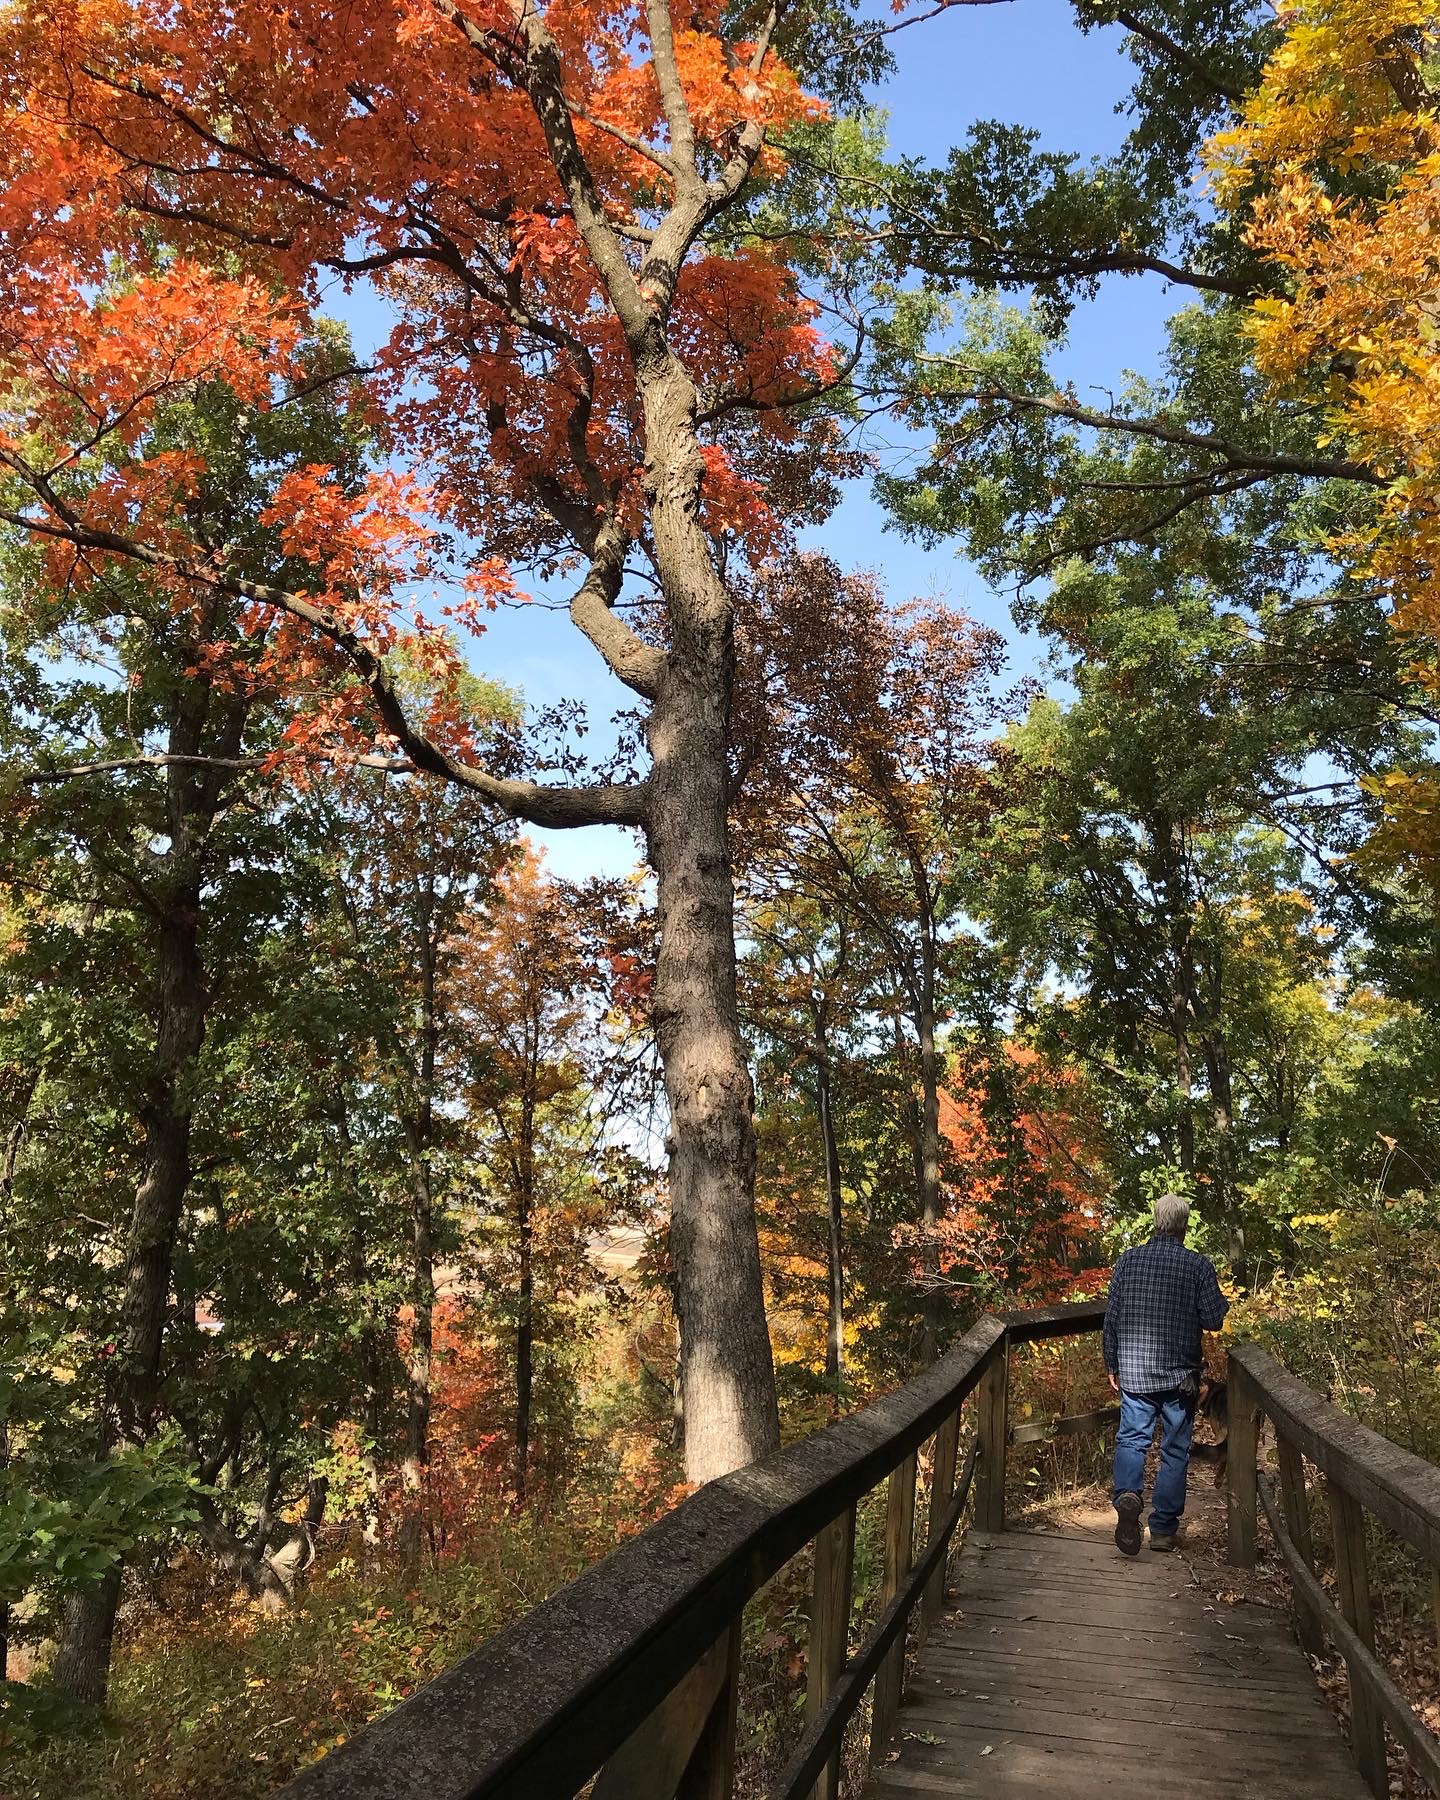 A man hiking along a board walk through a forest with fall colors.